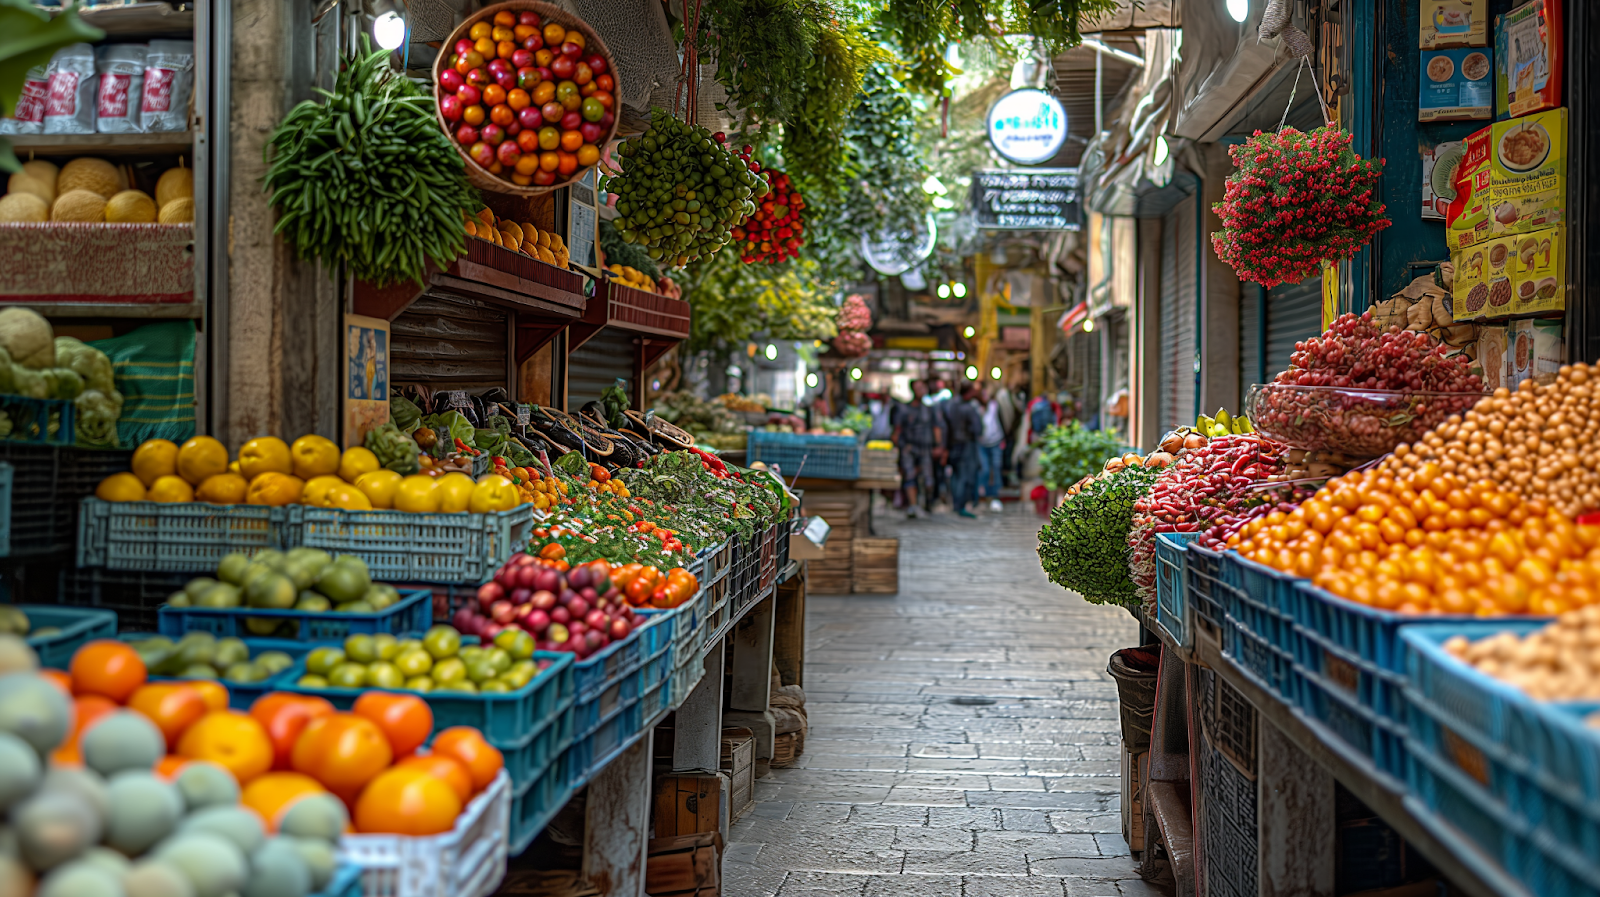 Aisles of Carmel Market in Tel Aviv, brimming with colorful arrays of fresh produce, spices, and local specialties to bustling crowds.